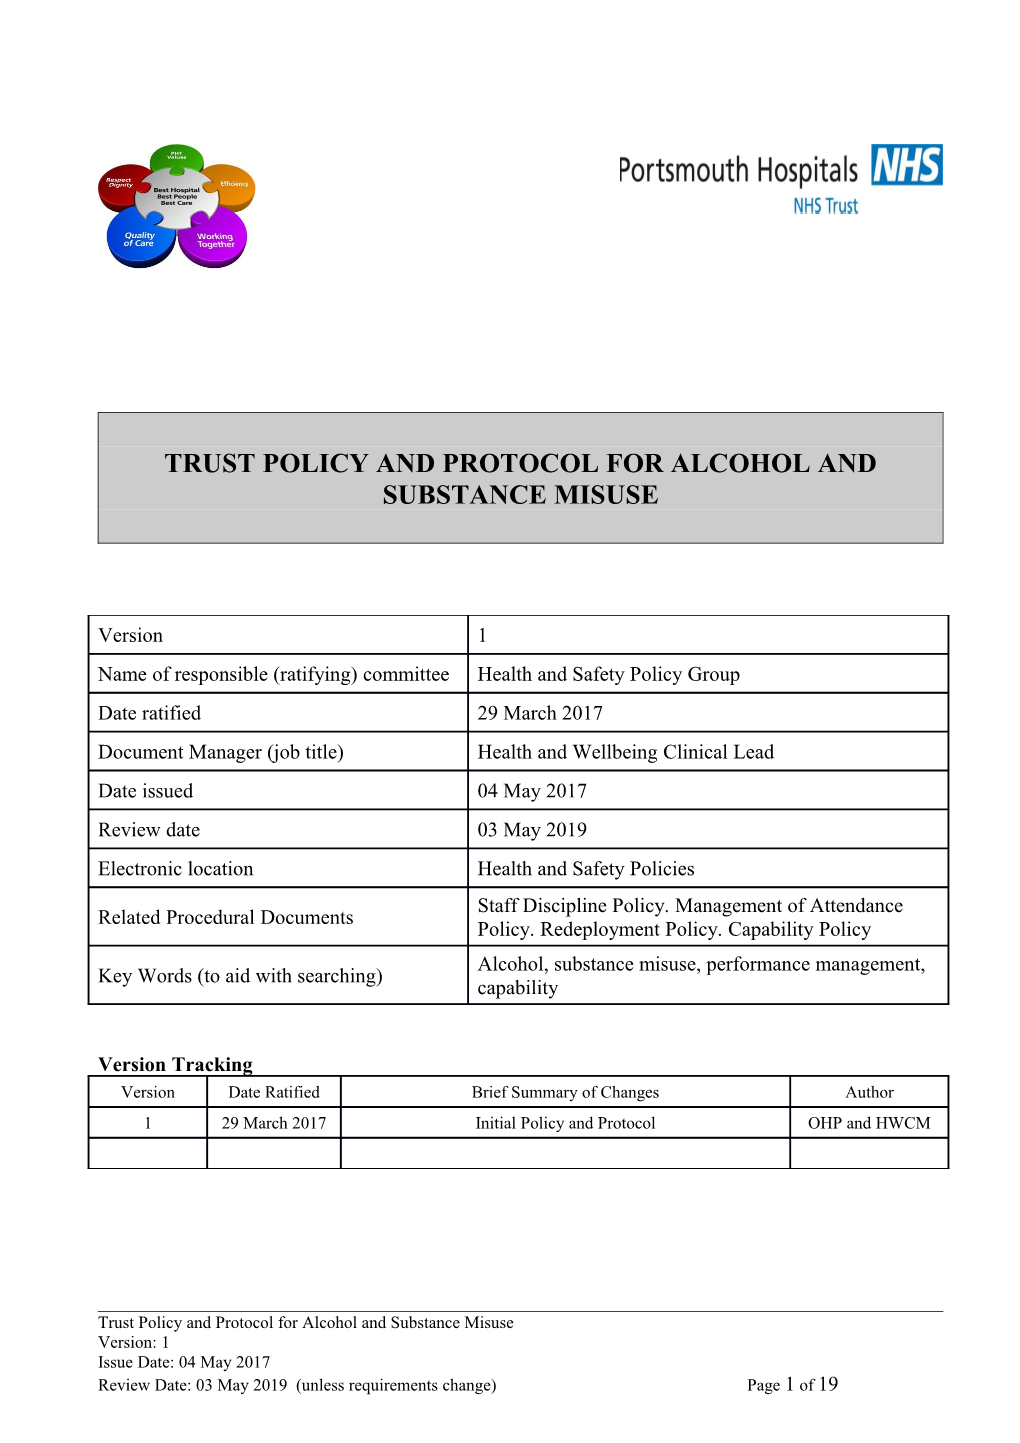 Trust Policy and Protocol for Alcohol and Substance Misuse